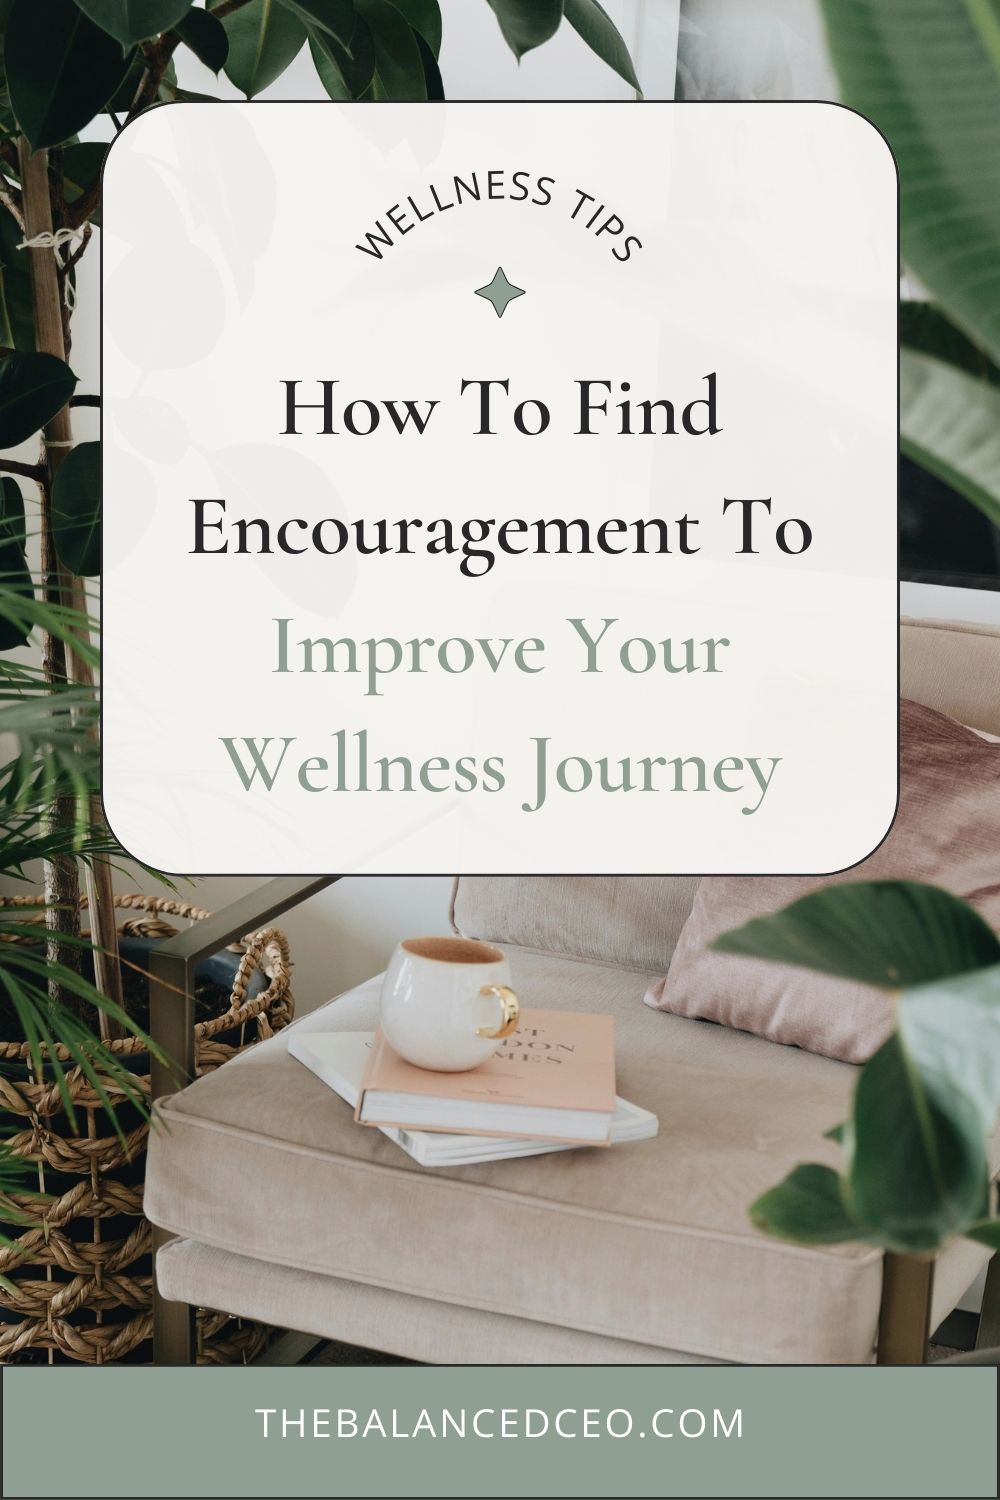 How to Find Encouragement to Improve Your Wellness Journey